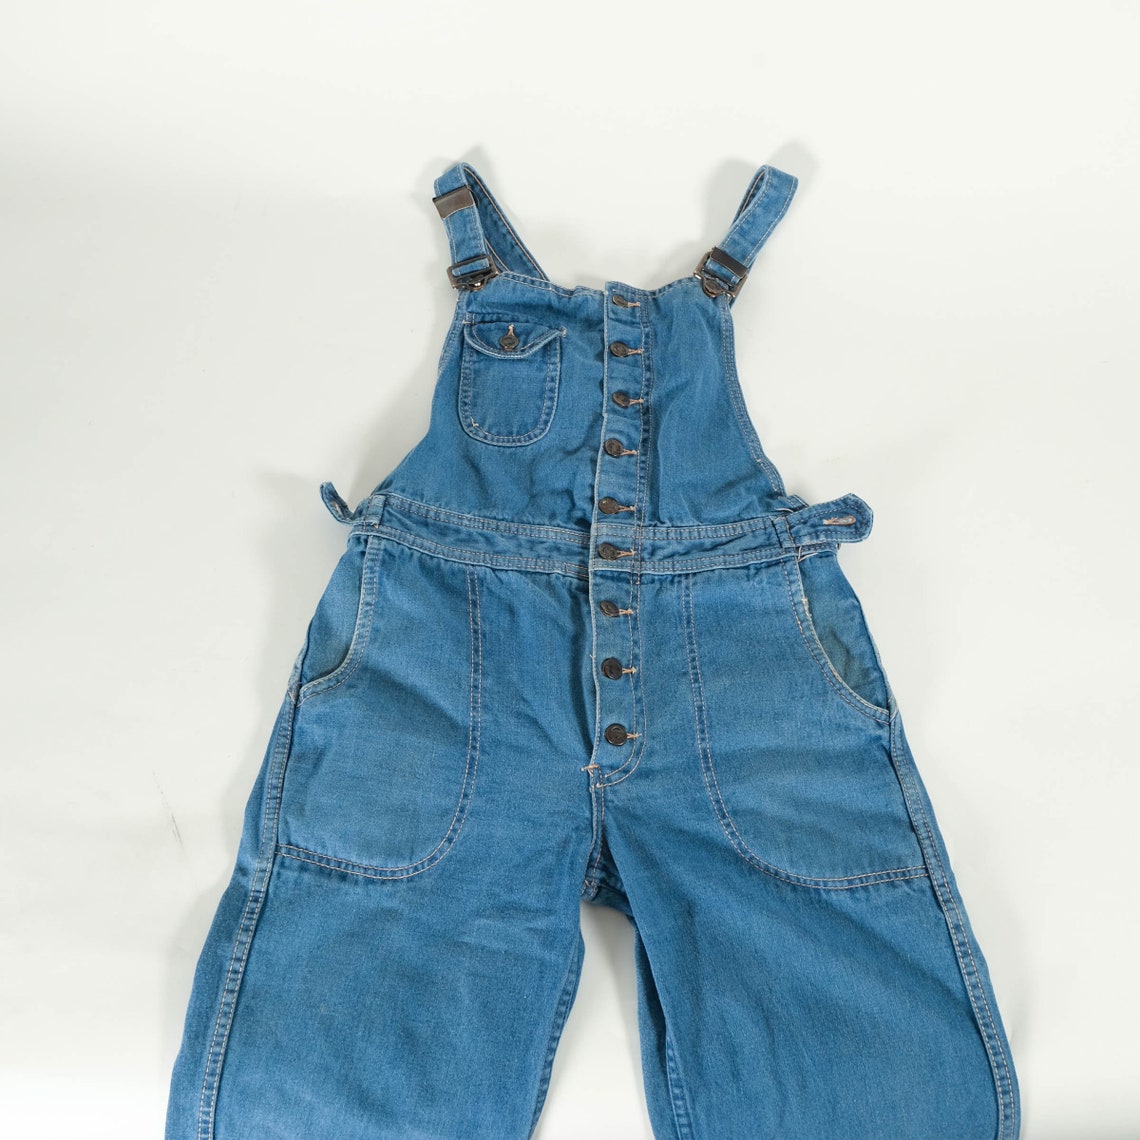 Vintage 1970s Small Hang Ten Overalls - Etsy